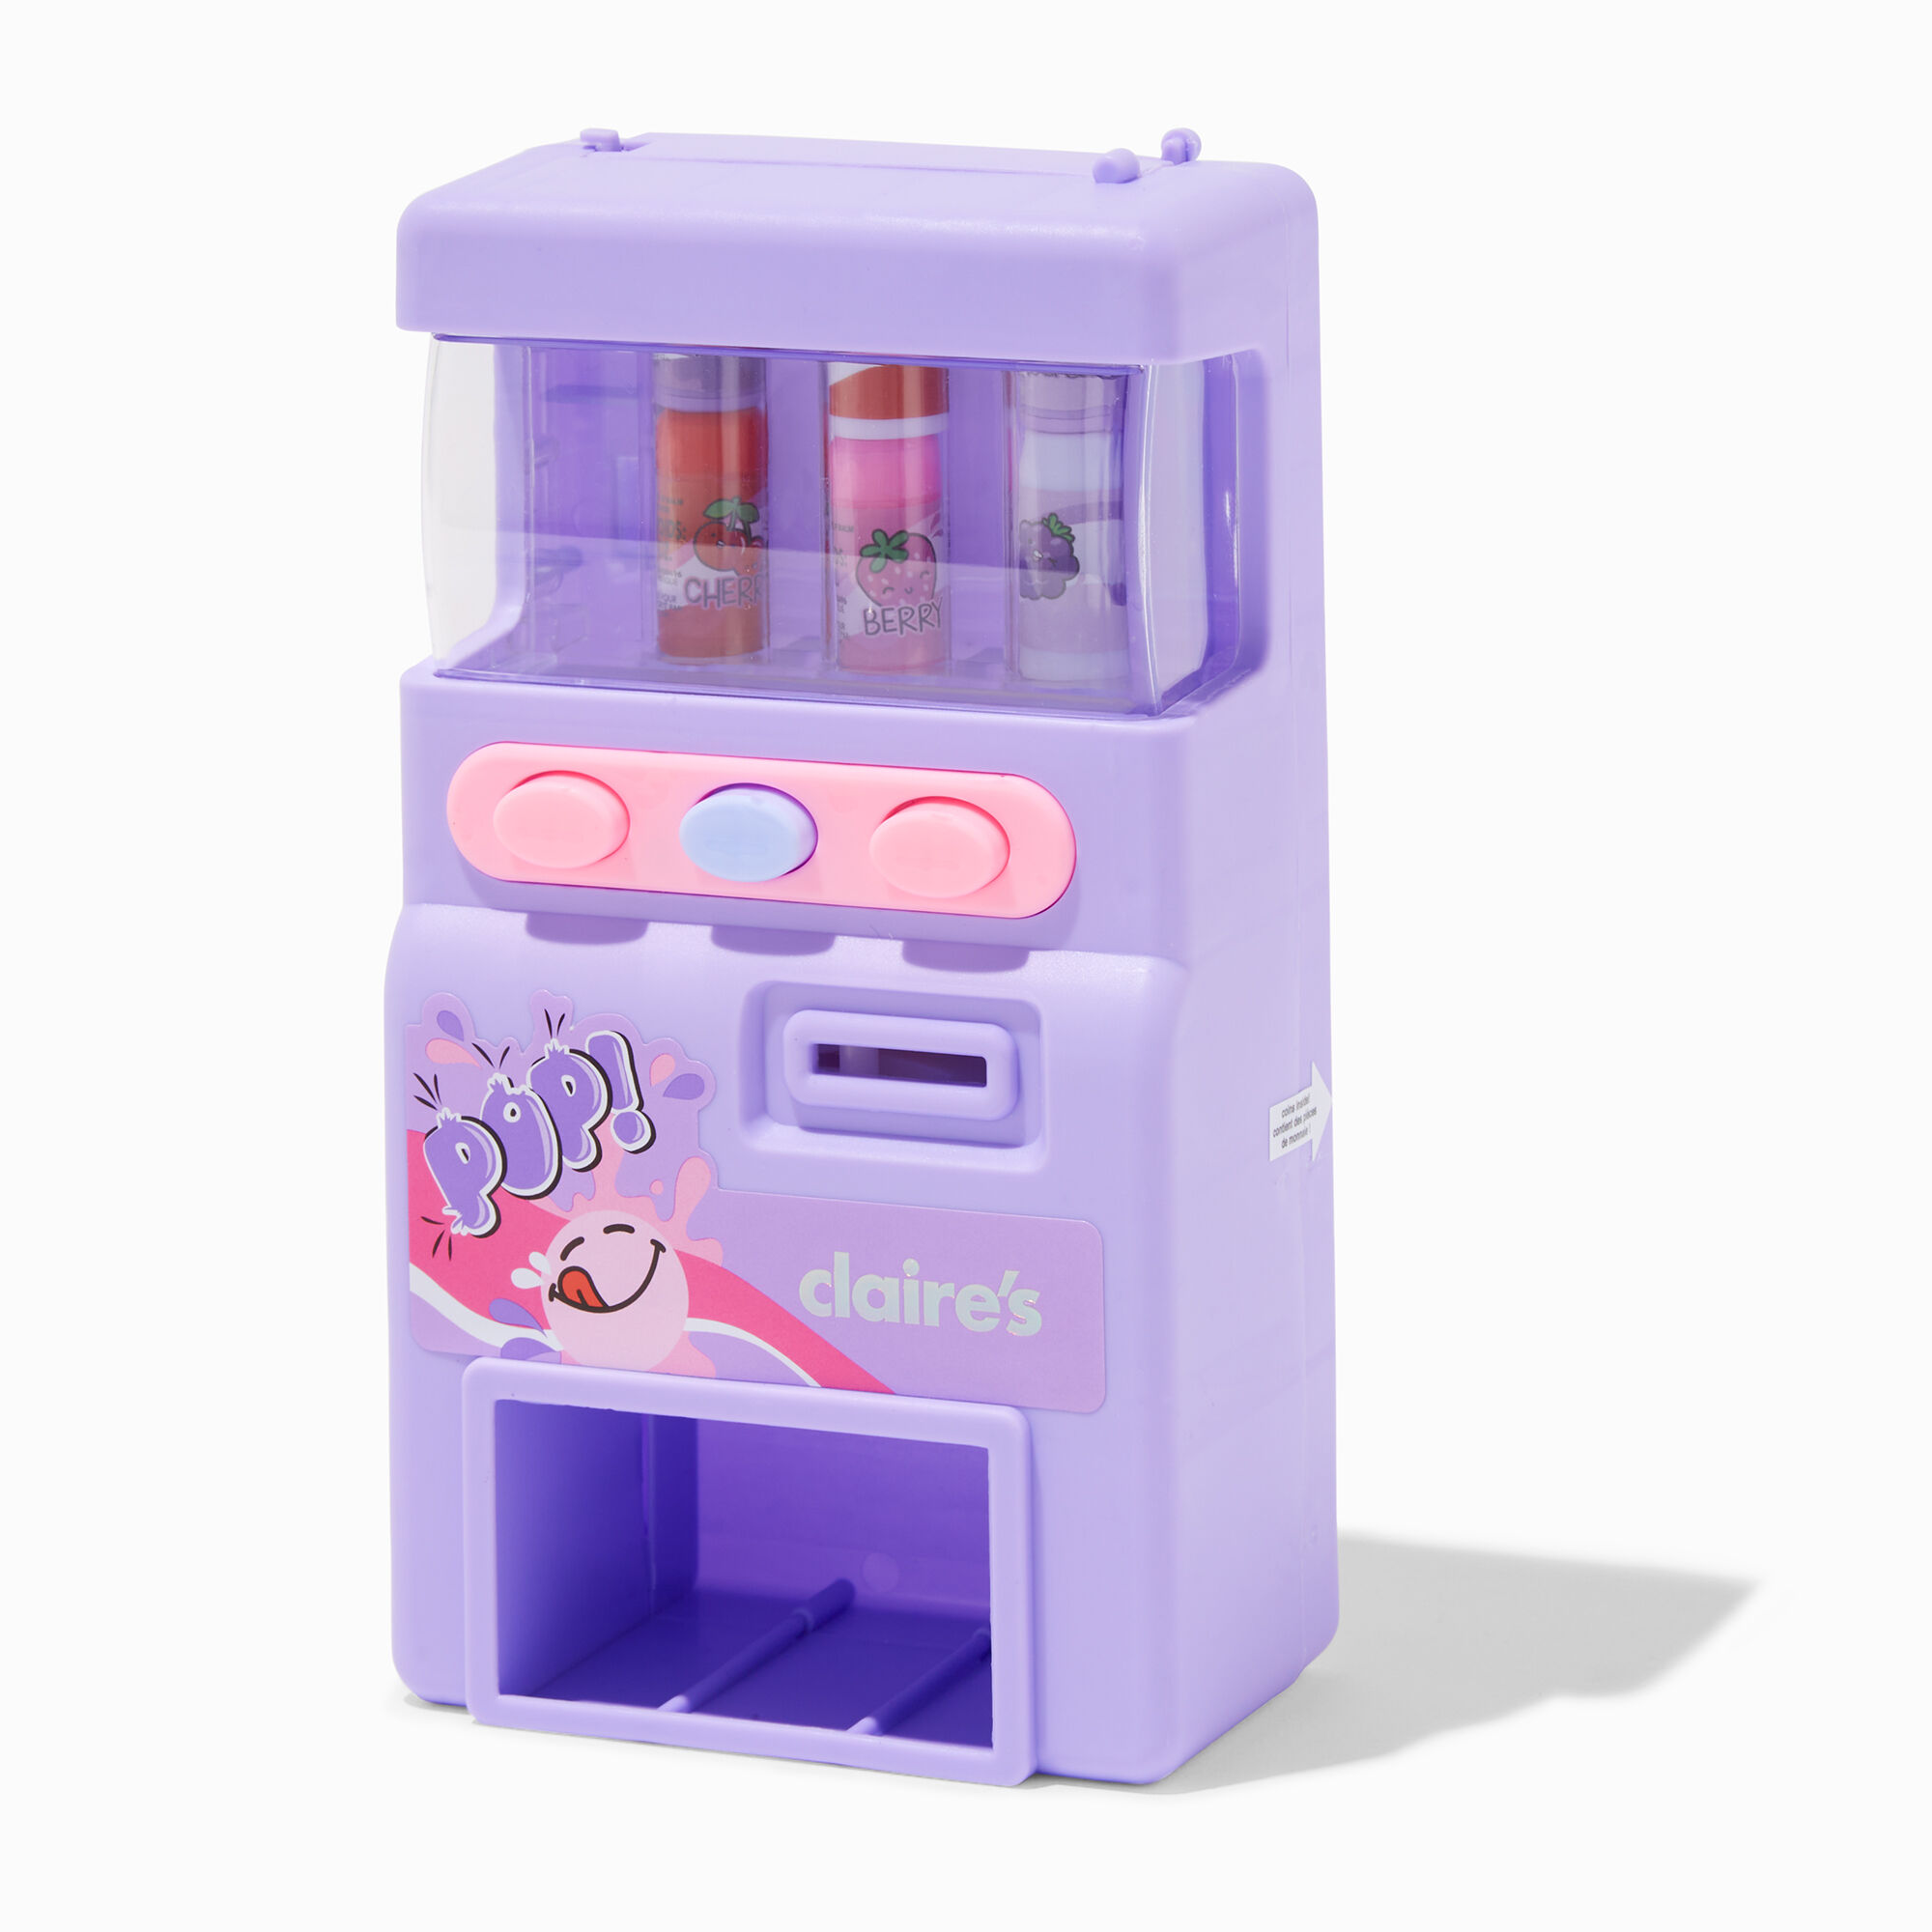 View Claires Sweets Vending Machine Lip Balm Set 10 Pack information